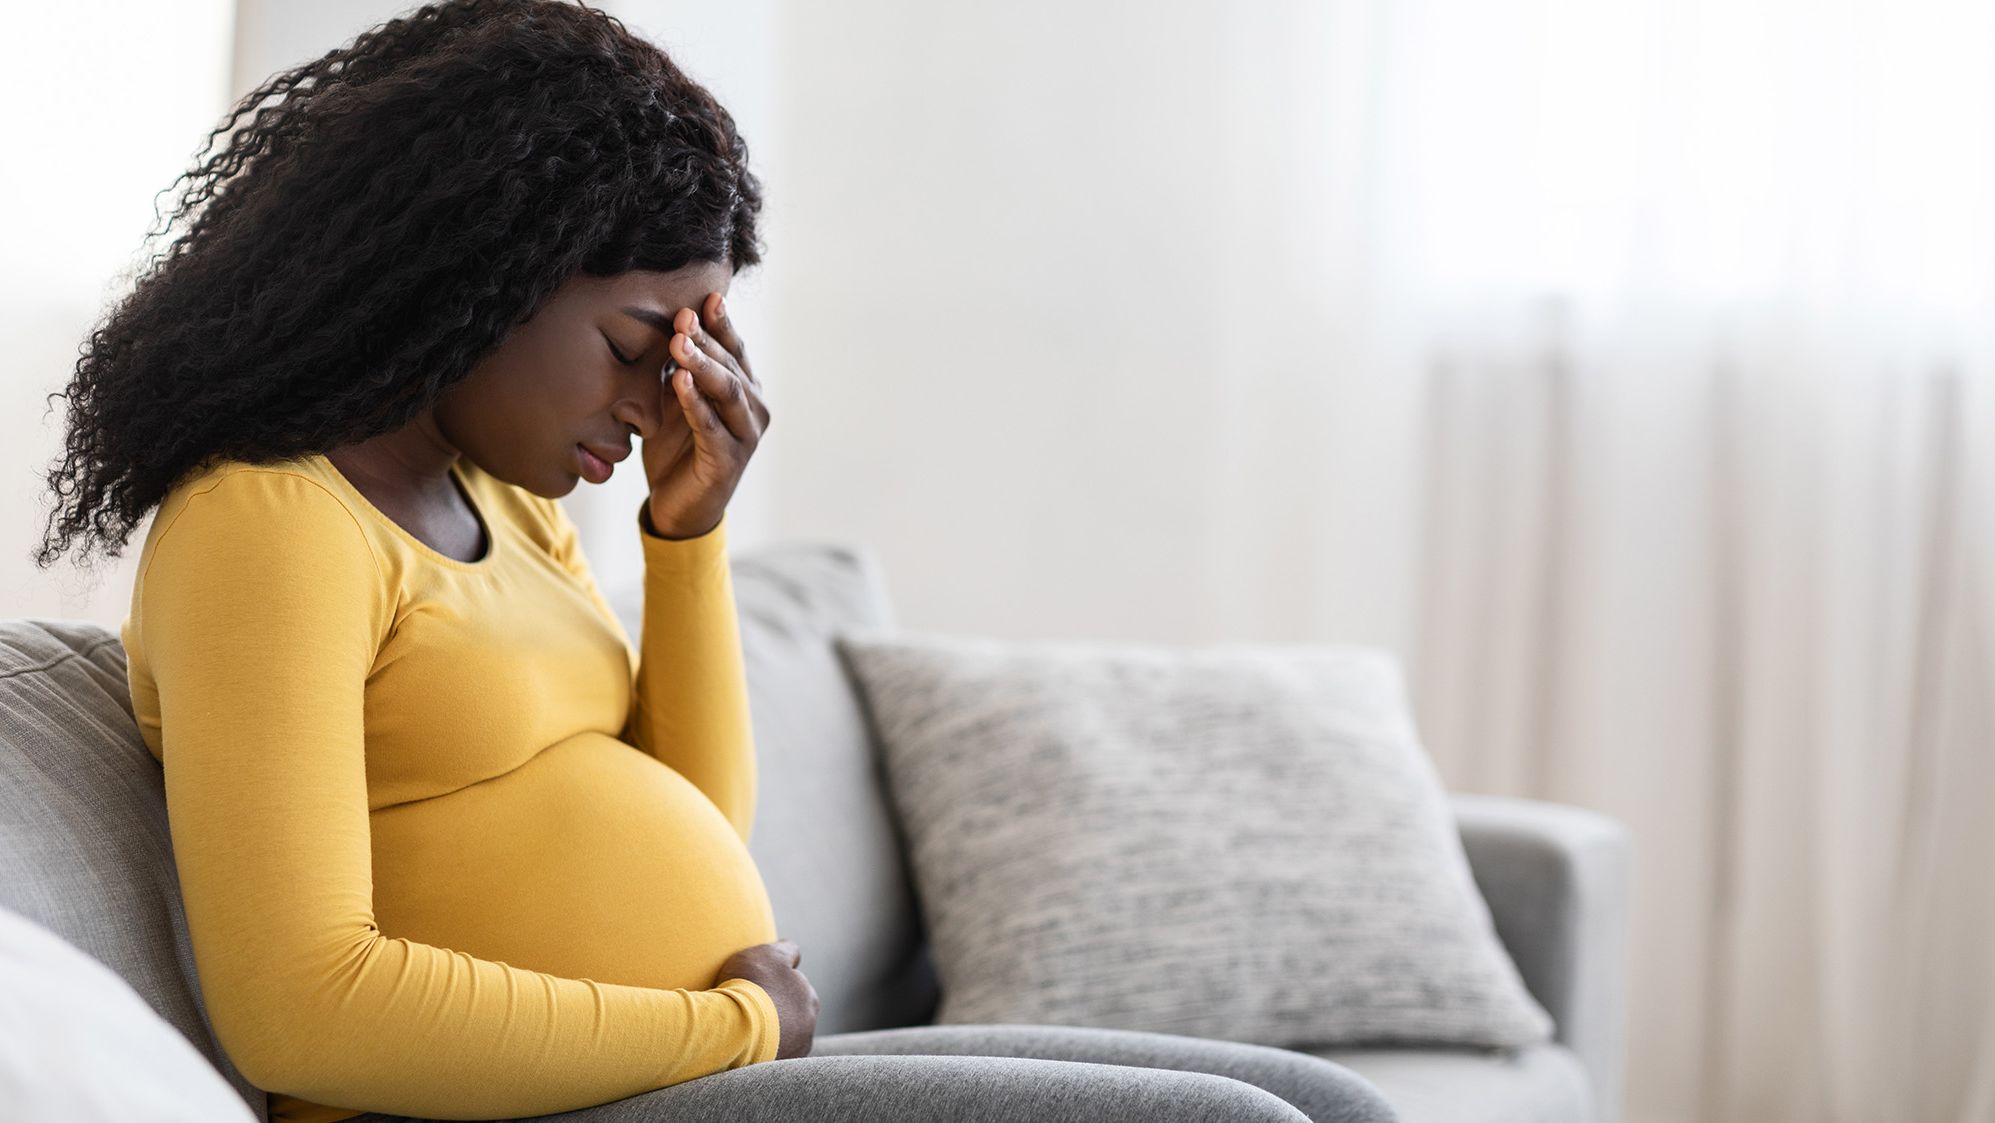 Babies with mothers who faced changing stress levels during pregnancy are predisposed to feeling frequent negative emotions like fear and distress, a new study said.